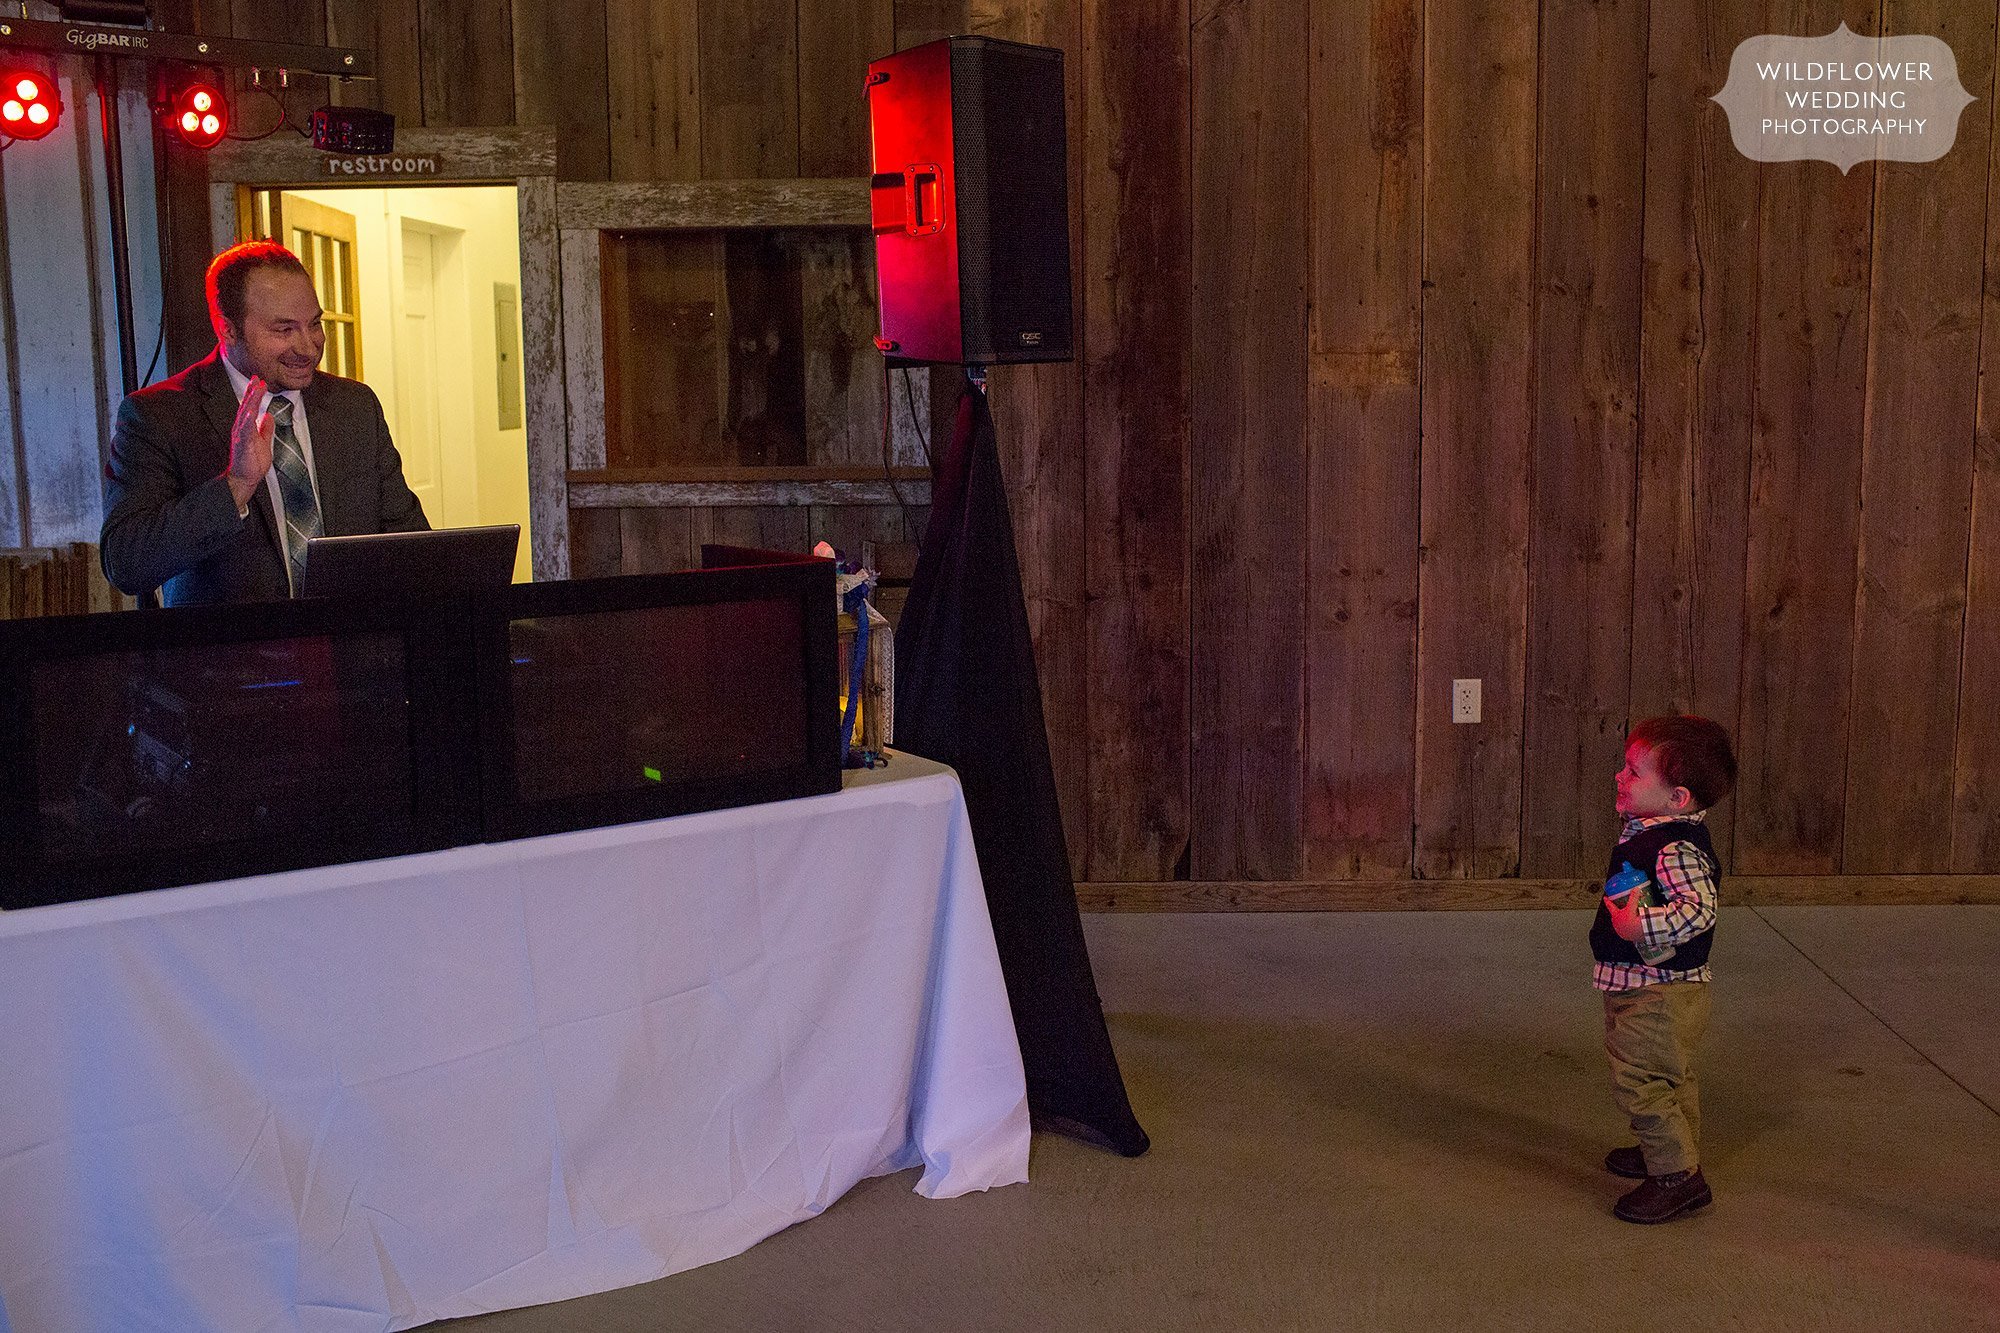 Hilarious photo of the DJ waving to a funny toddler on the dance floor at this Weston barn wedding.